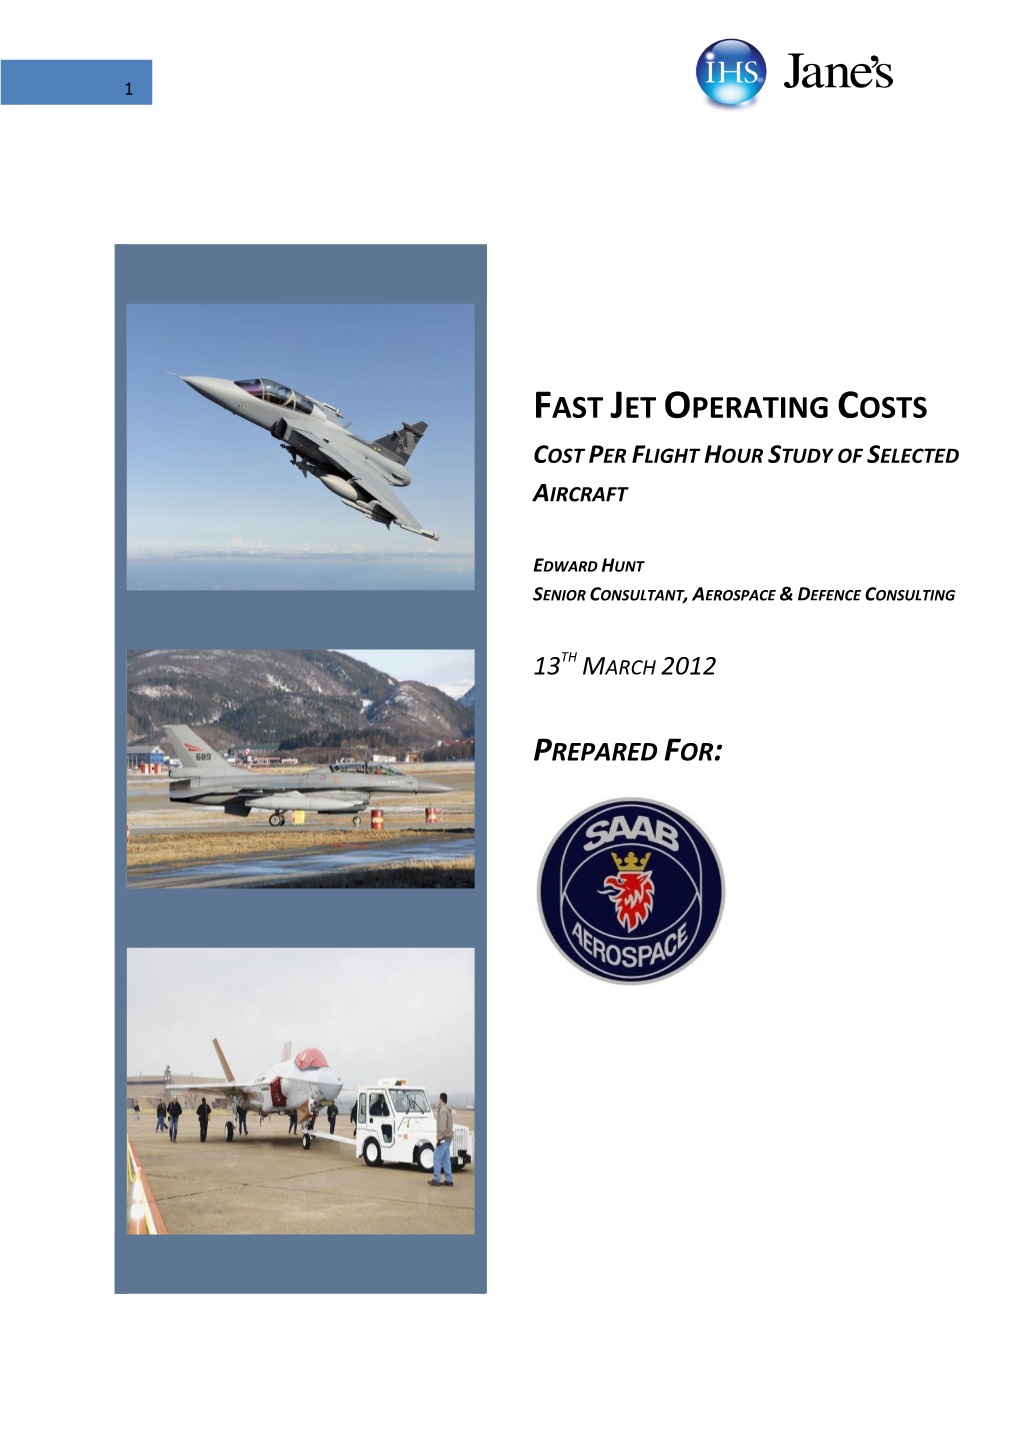 Fast Jet Operating Costs Cost Per Flight Hour Study of Selected Aircraft